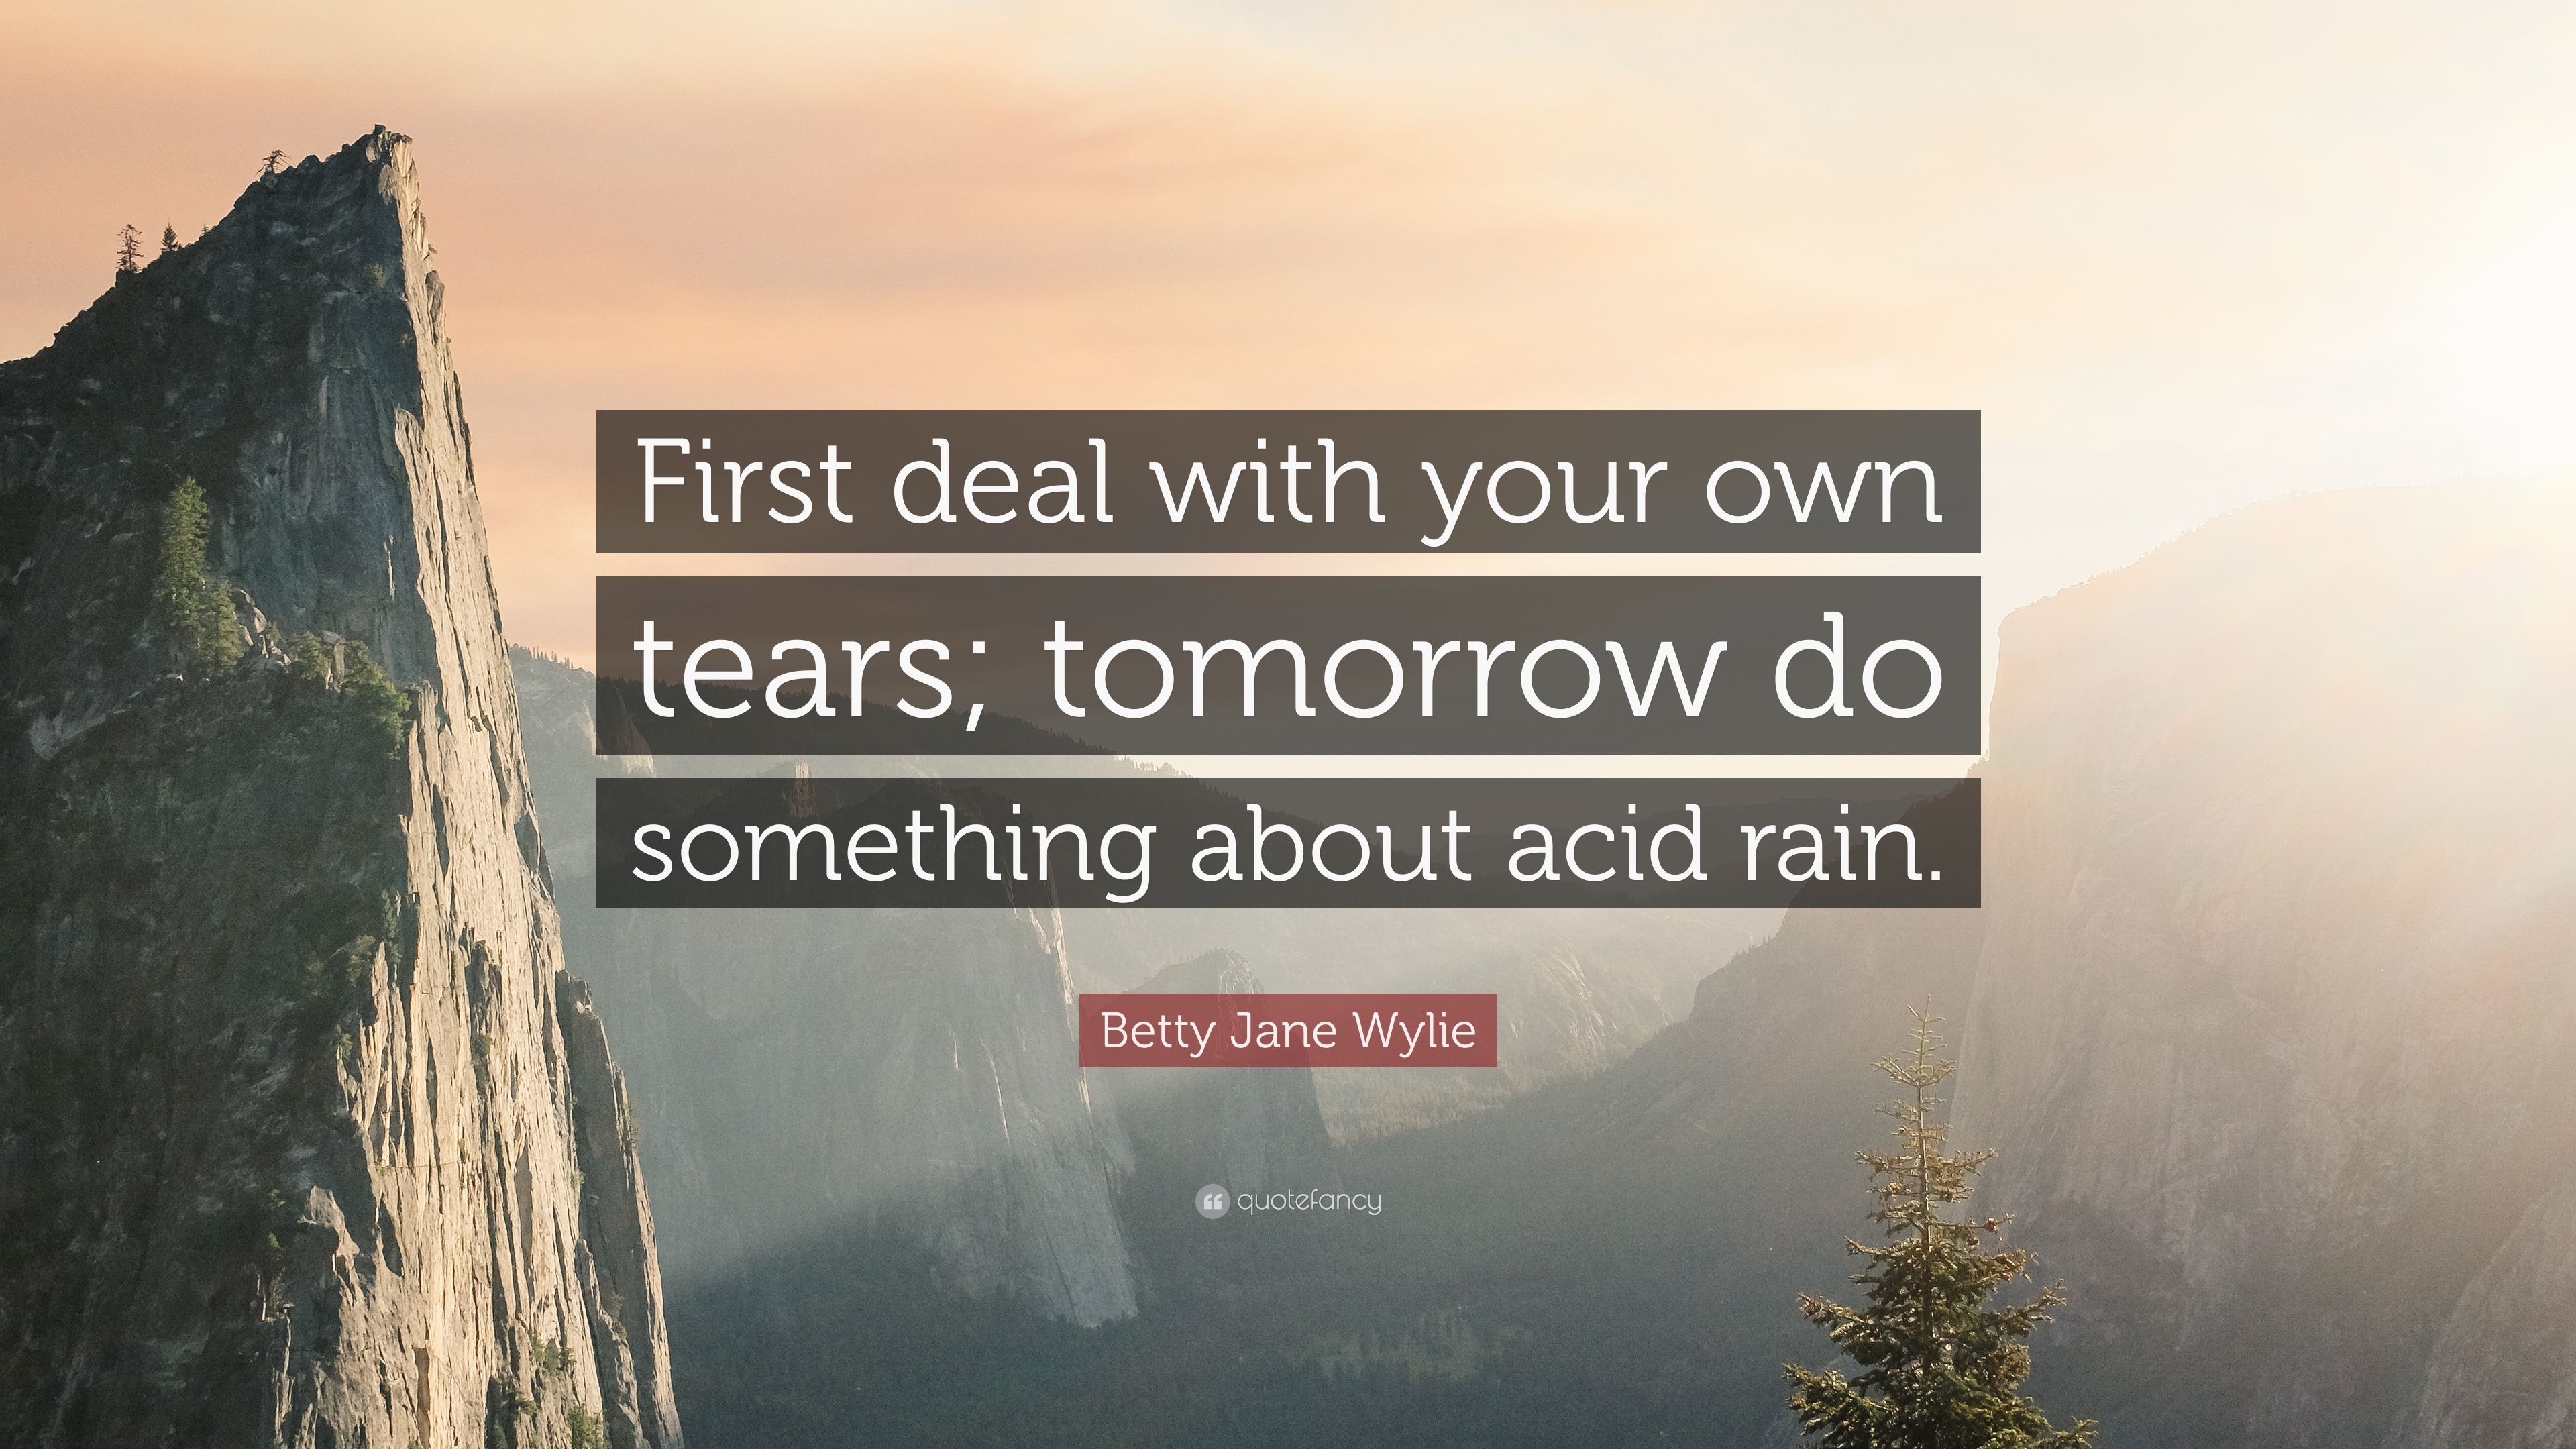 Betty Jane Wylie Quote: “First deal with your own tears; tomorrow do something about acid rain.” (7 wallpaper)